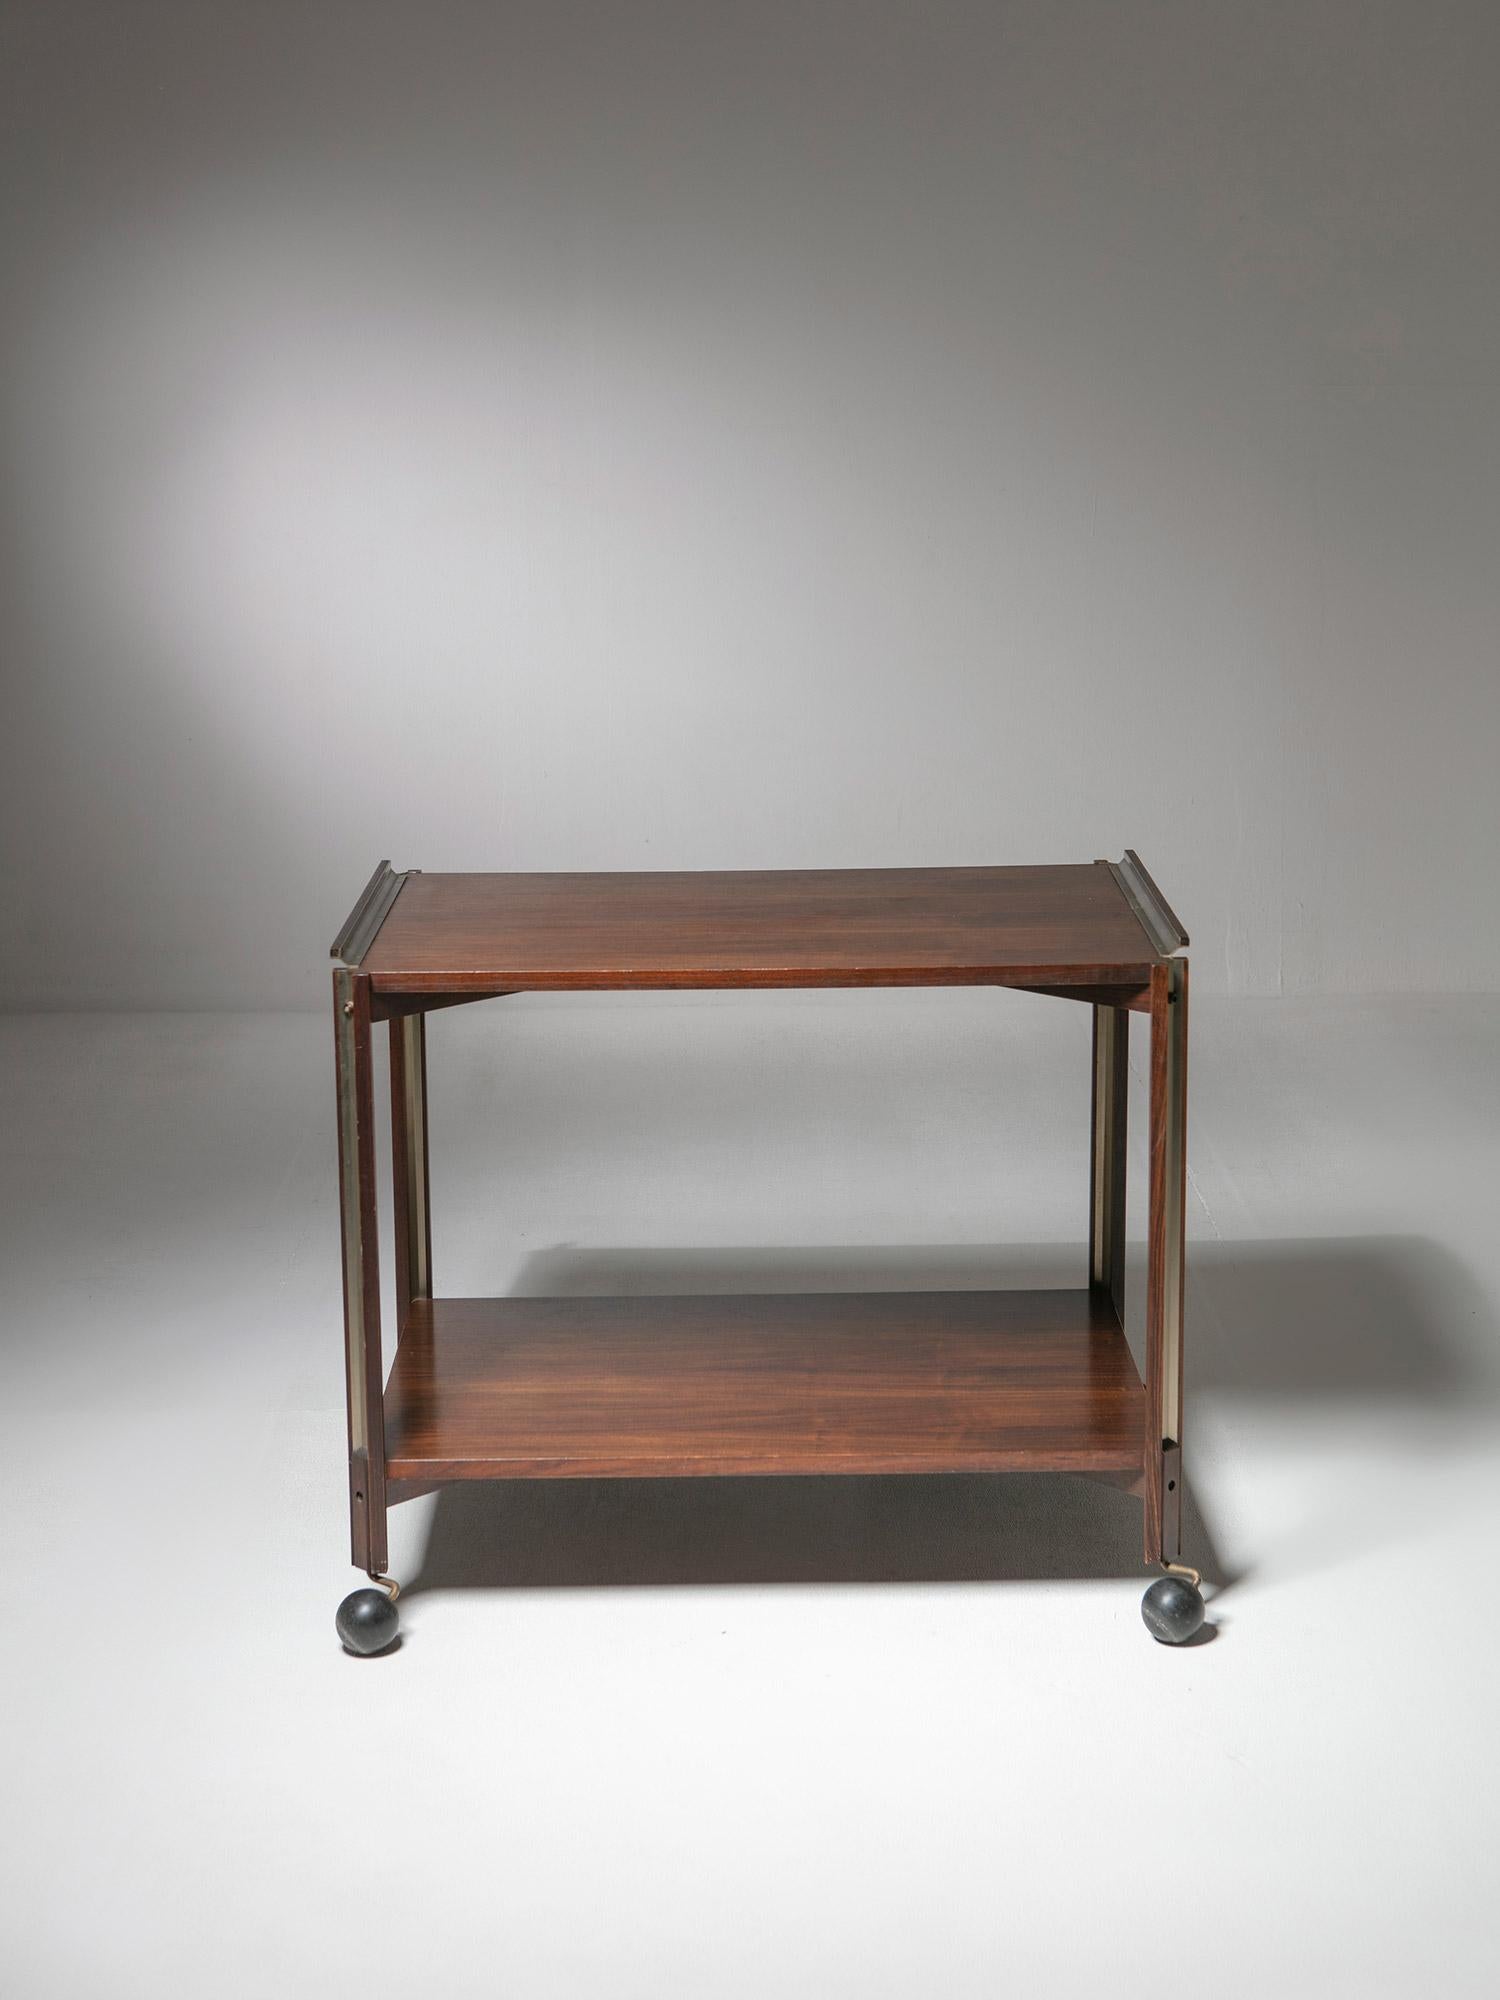 Italian Metal and Wood Cart by Ico Parisi for MIM Rome, Italy, 1950s For Sale